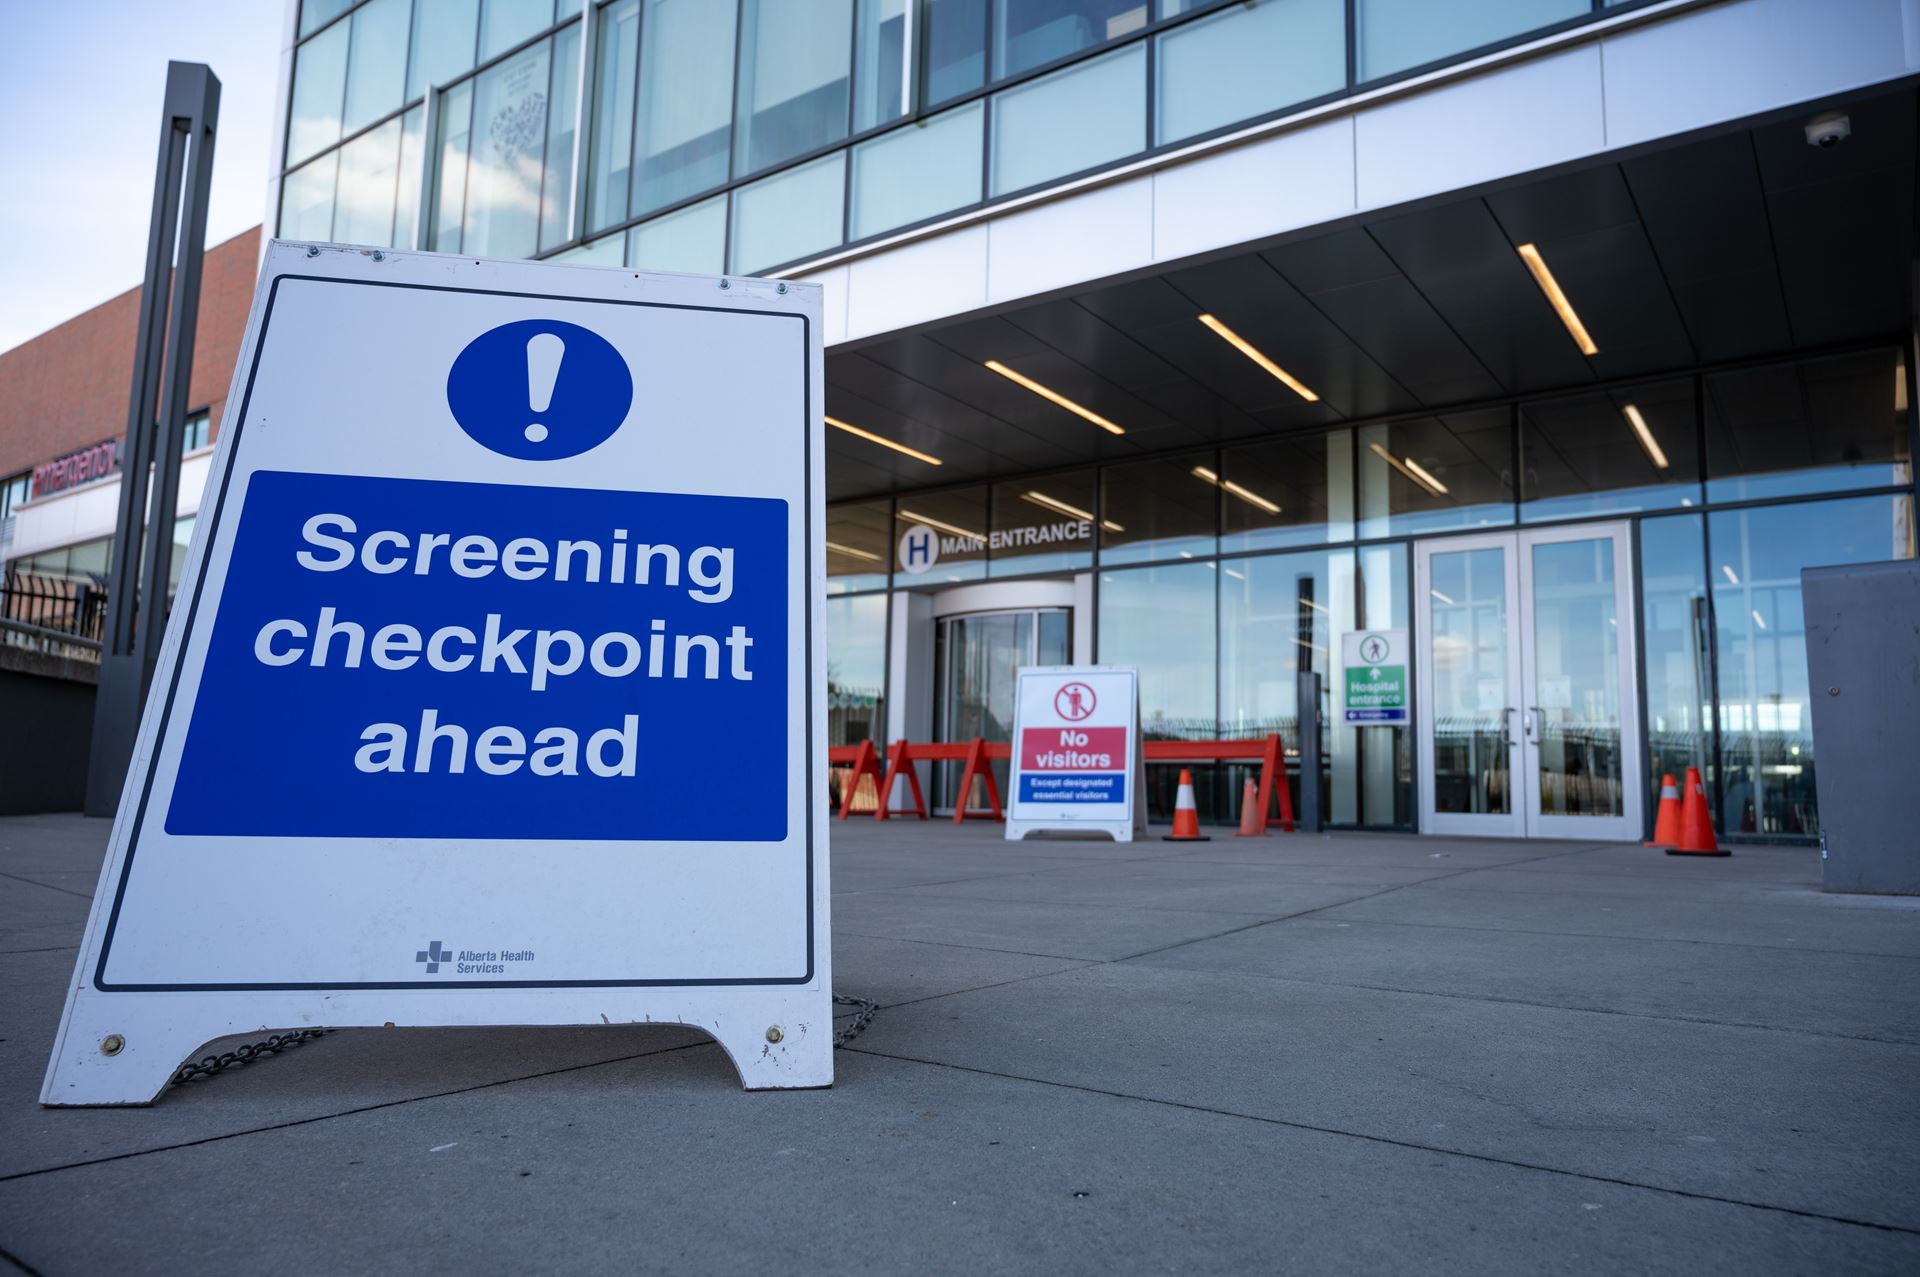 Screening checkpoint ahead poster